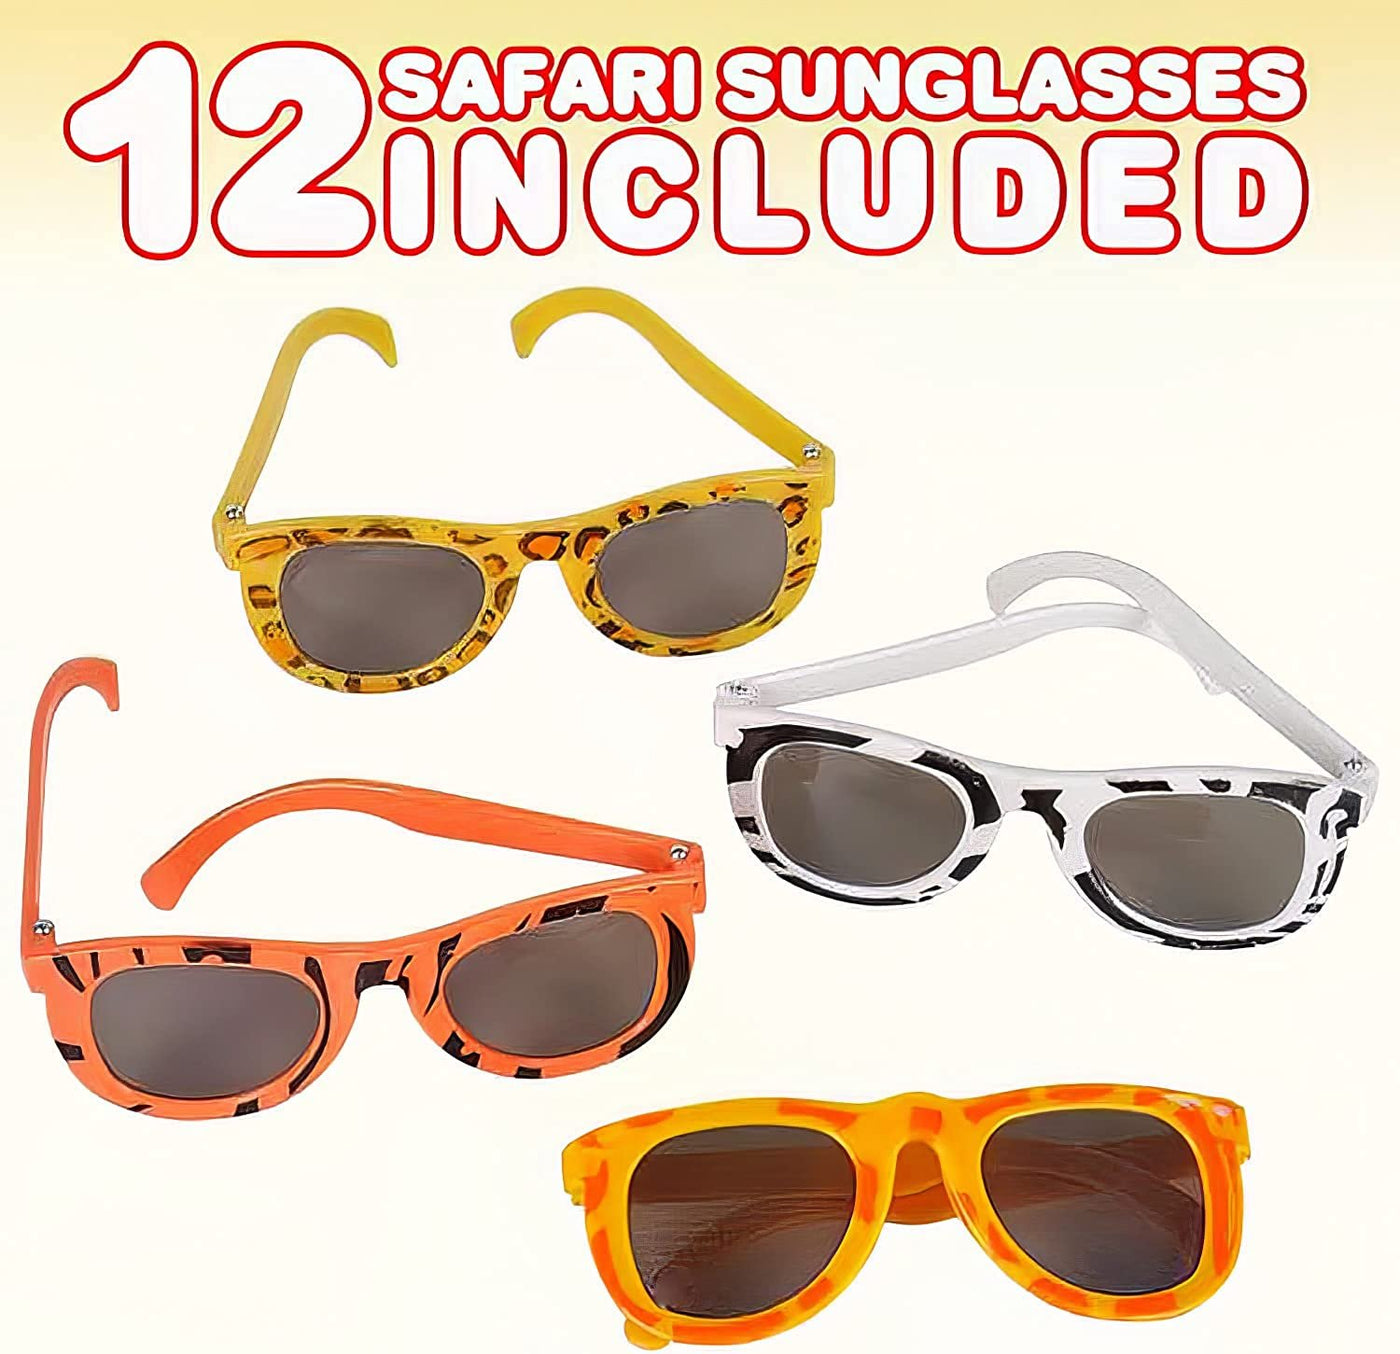 ArtCreativity Safari Sunglasses - Pack of 12 - Youth Size - Assorted Animal Prints - Summer Time Fun, Great Party Favor - Amazing Gift Idea for Boys and Girls